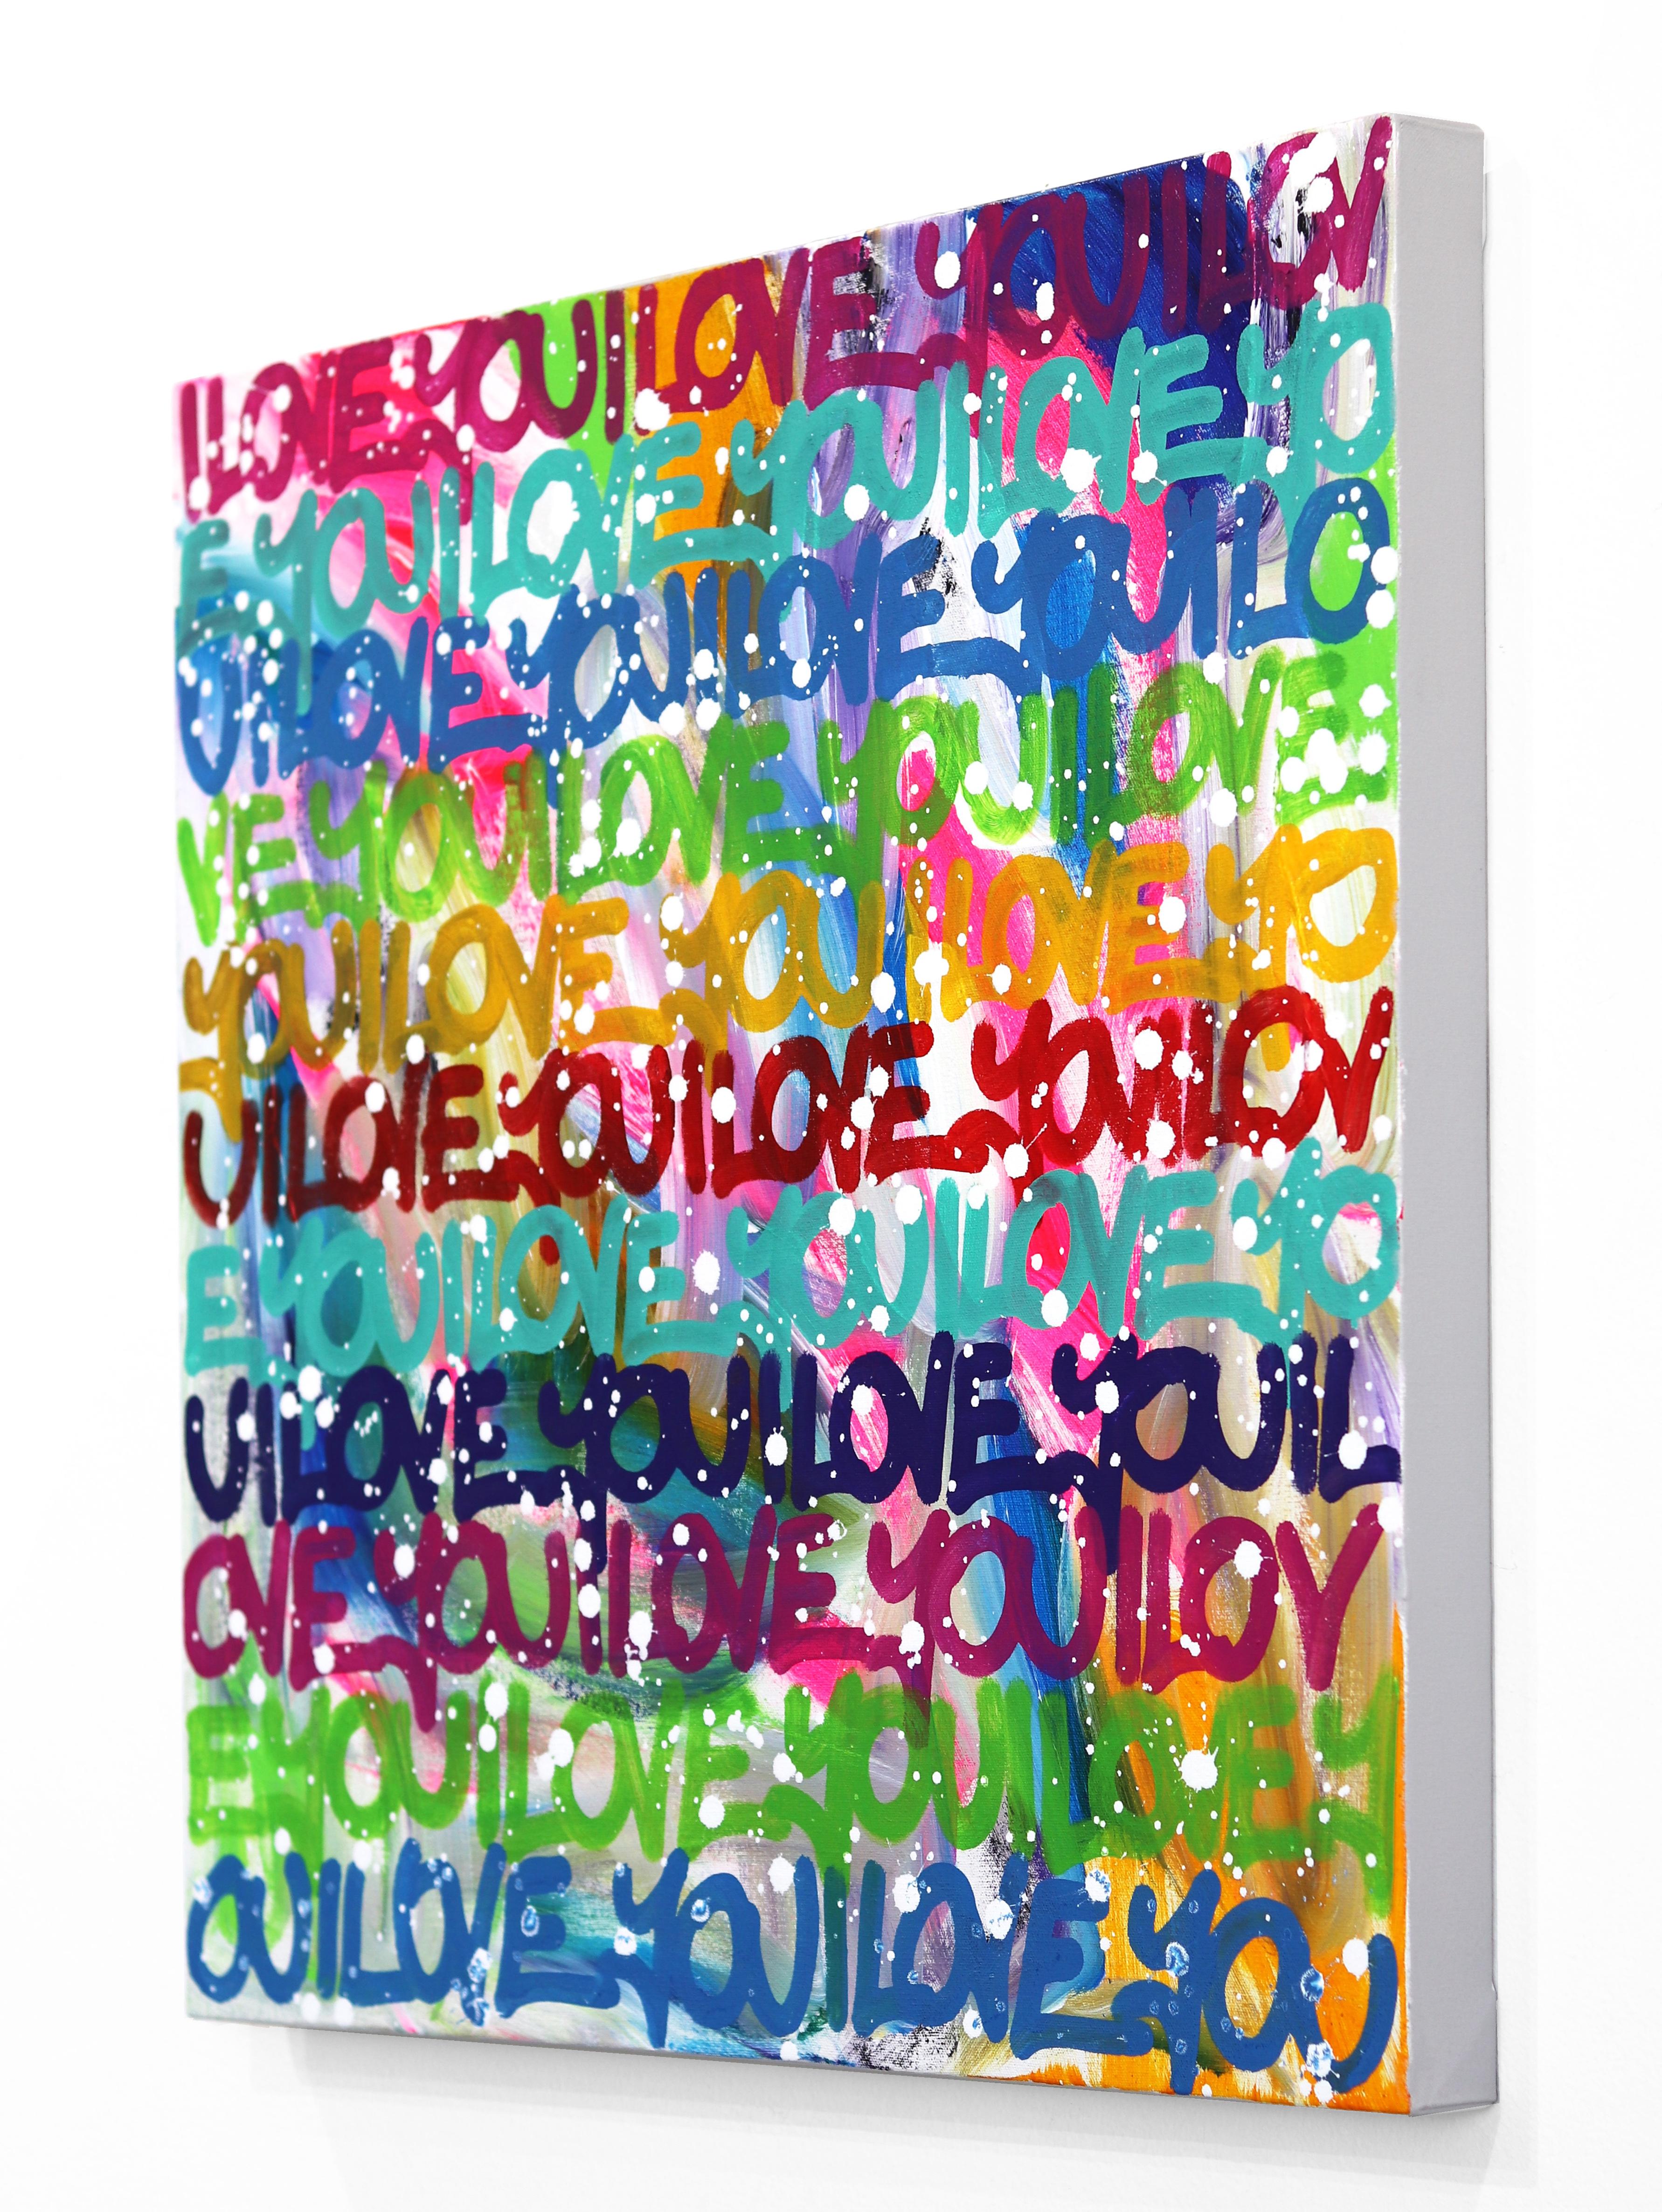 Show Your Colorful Side - Colorful Original Love Graffiti Painting on Canvas For Sale 1